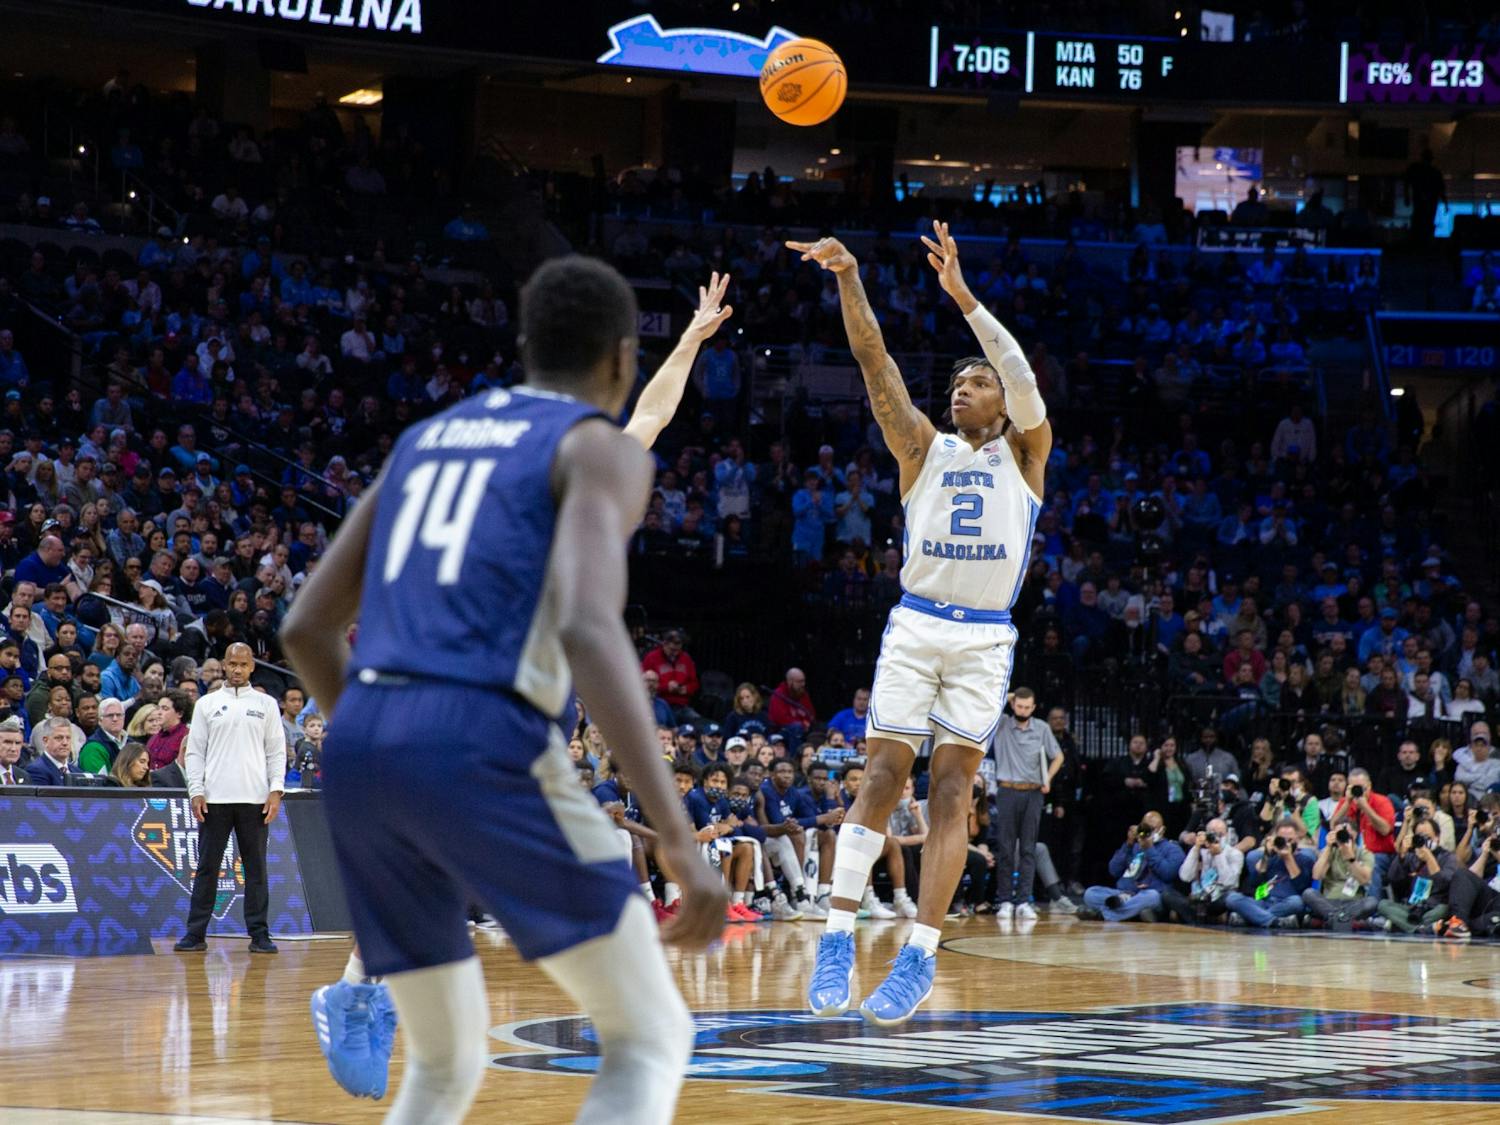 Sophomore guard Caleb Love (2) shoots a three at the Elite 8 game of the NCAA tournament against St. Peter's at the Wells Fargo Center in Philadelphia. UNC won 69-49 and is advancing to the Final Four. &nbsp;&nbsp;